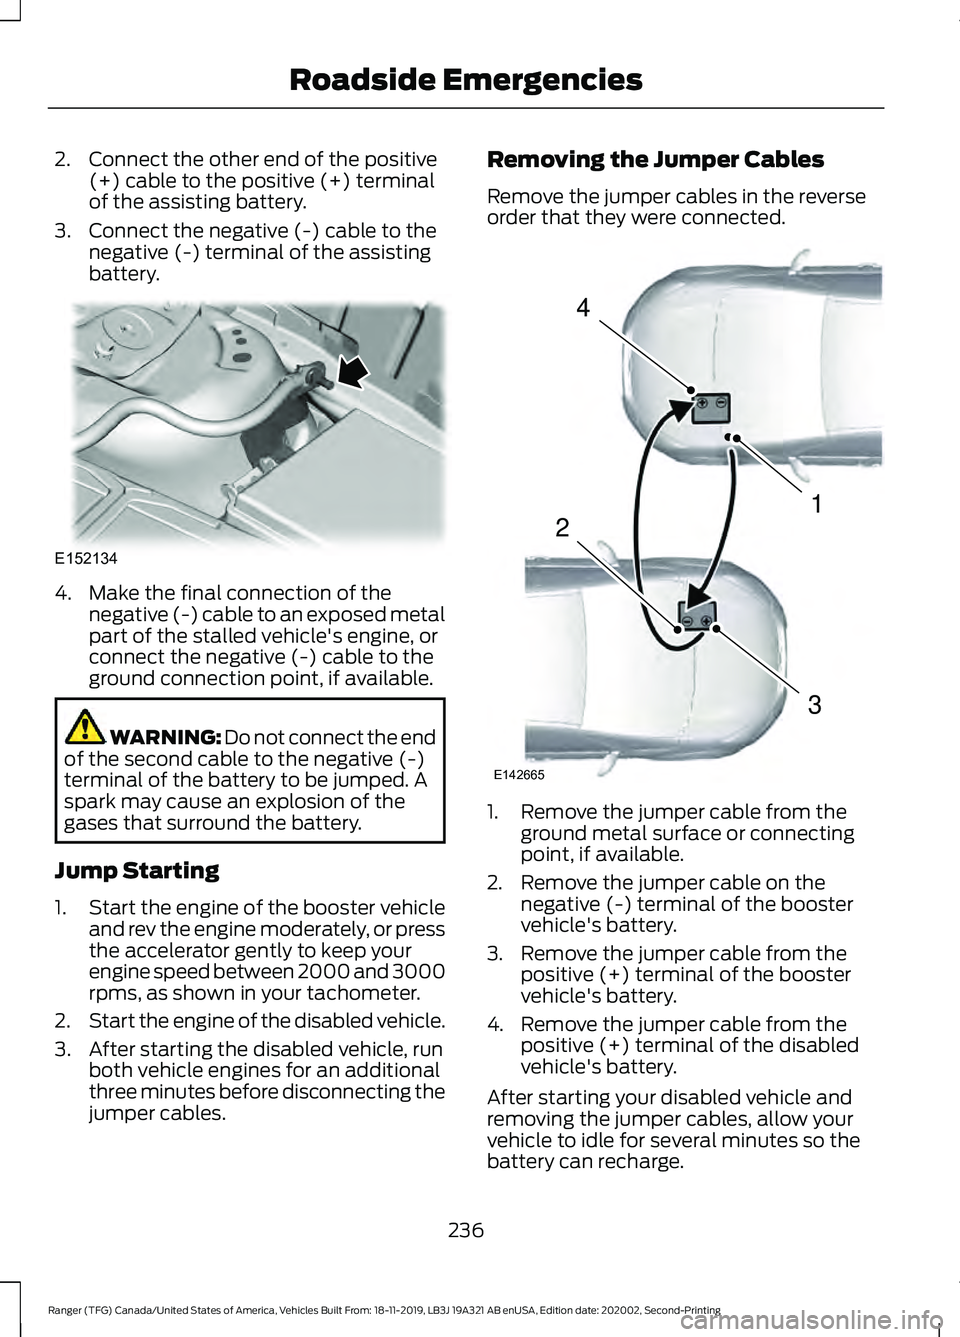 FORD RANGER 2020  Owners Manual 2. Connect the other end of the positive
(+) cable to the positive (+) terminal
of the assisting battery.
3. Connect the negative (-) cable to the negative (-) terminal of the assisting
battery. 4. Ma